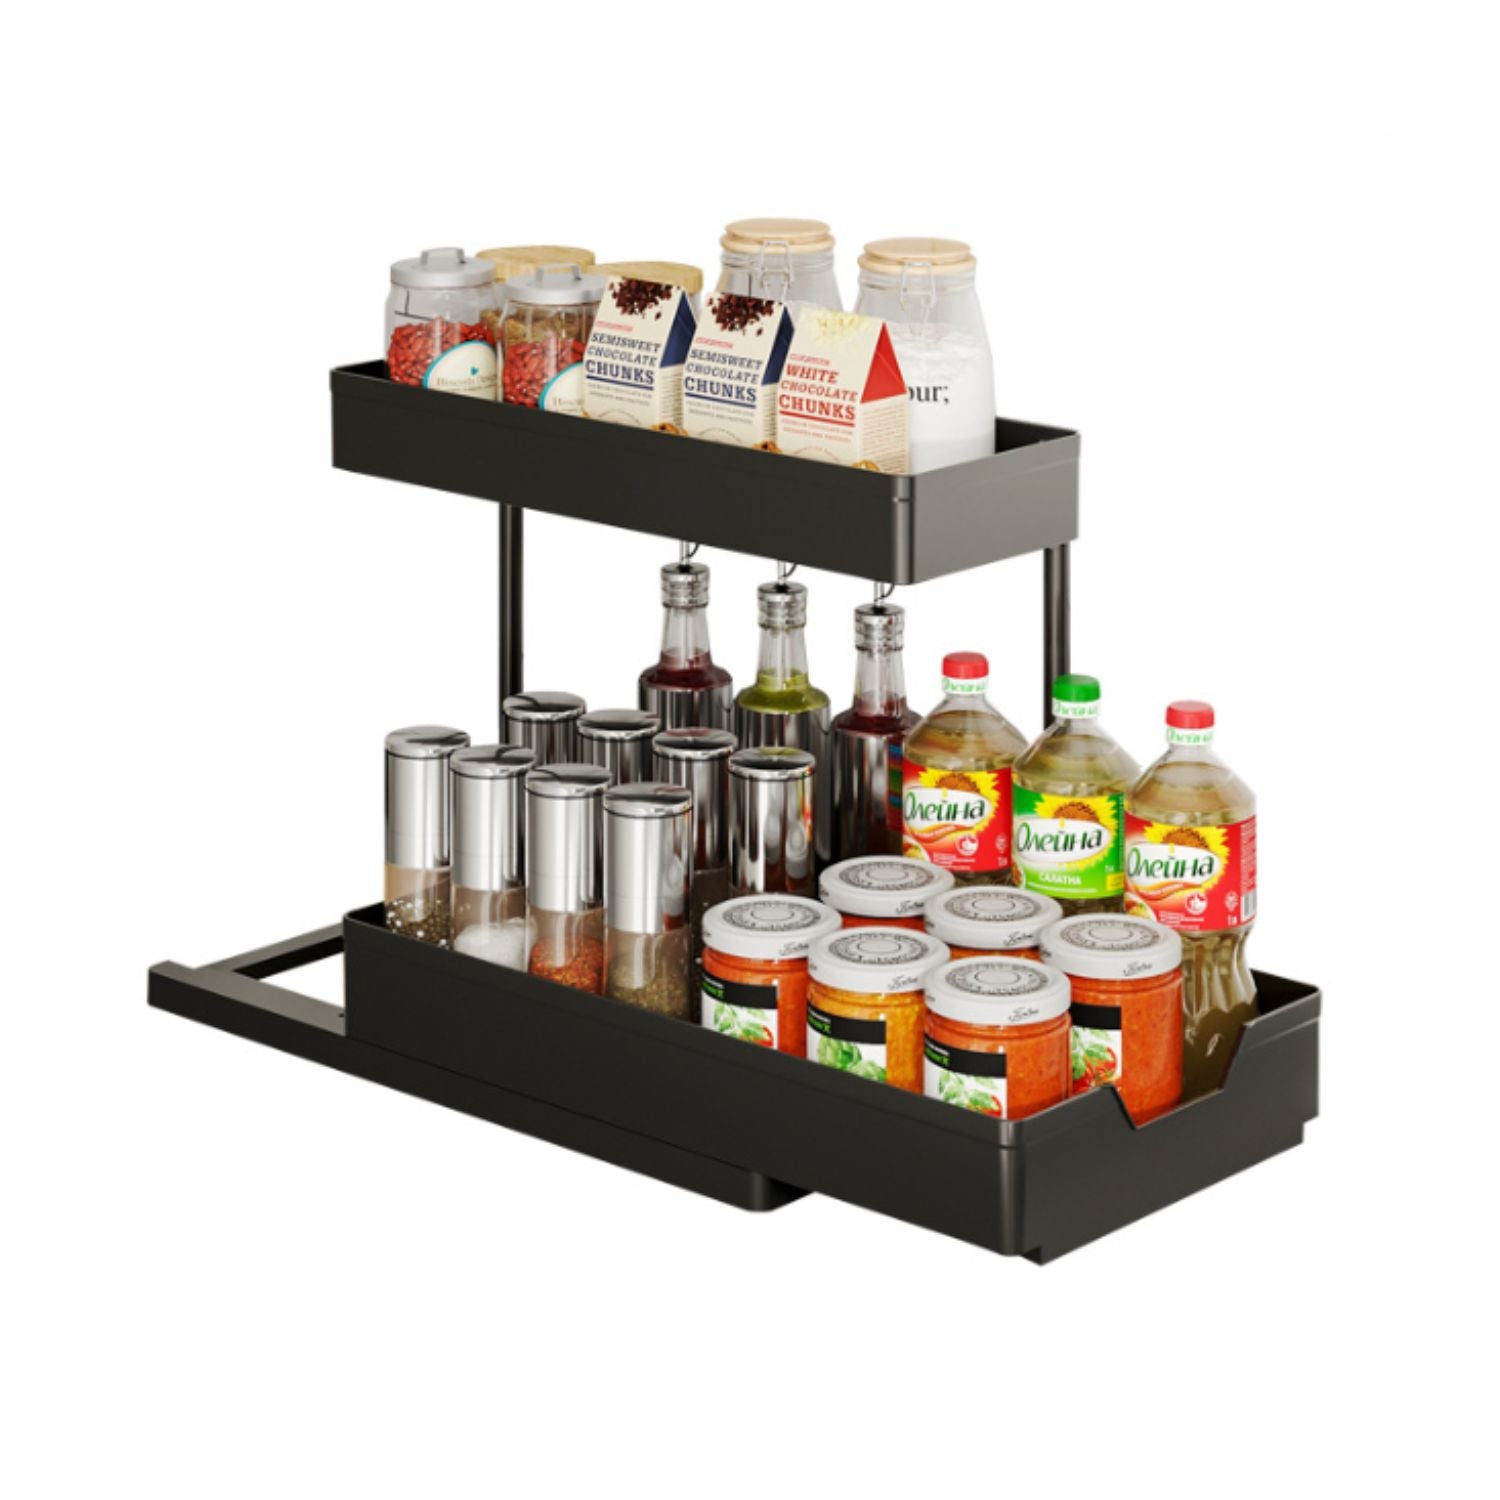 2 Packs 2-Tier Under Sink Organizer Shelf with 8 Hanging Hooks and 2 Cup Holders (Black) GO-USO-102-NE